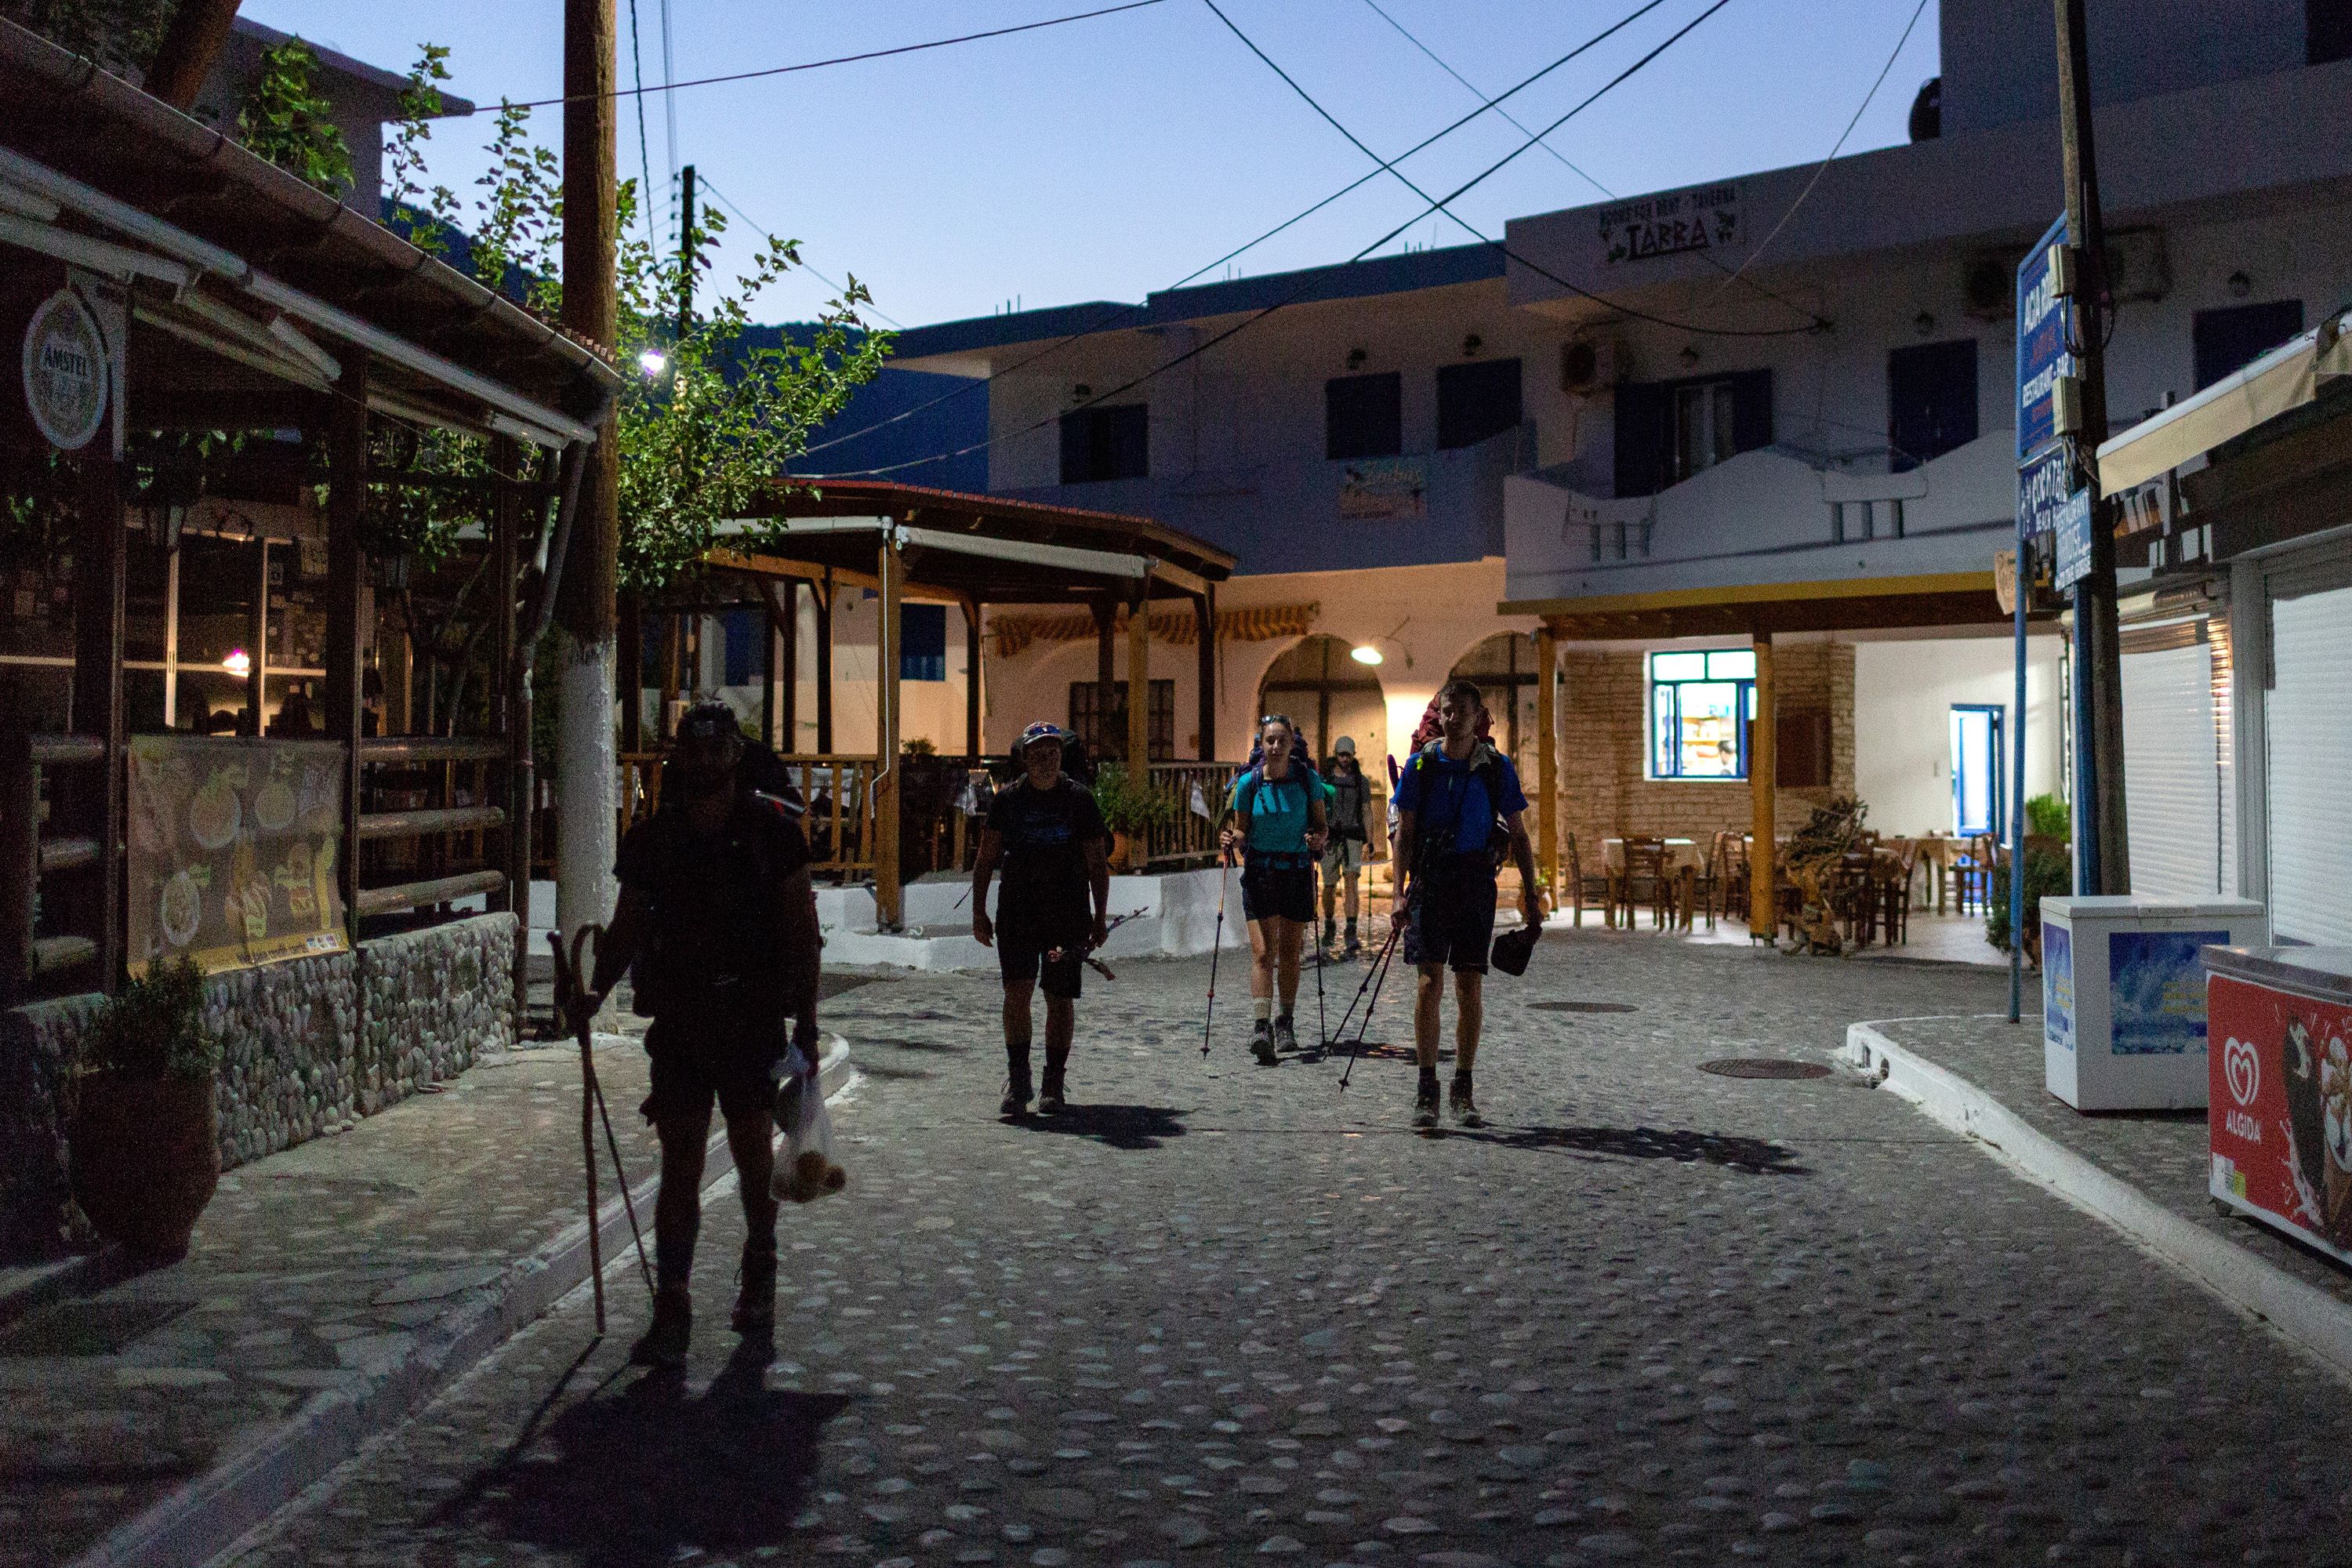 Students silhouetted as they walk through village streets at dusk, the streetlights casting long shadows on the cobbled street